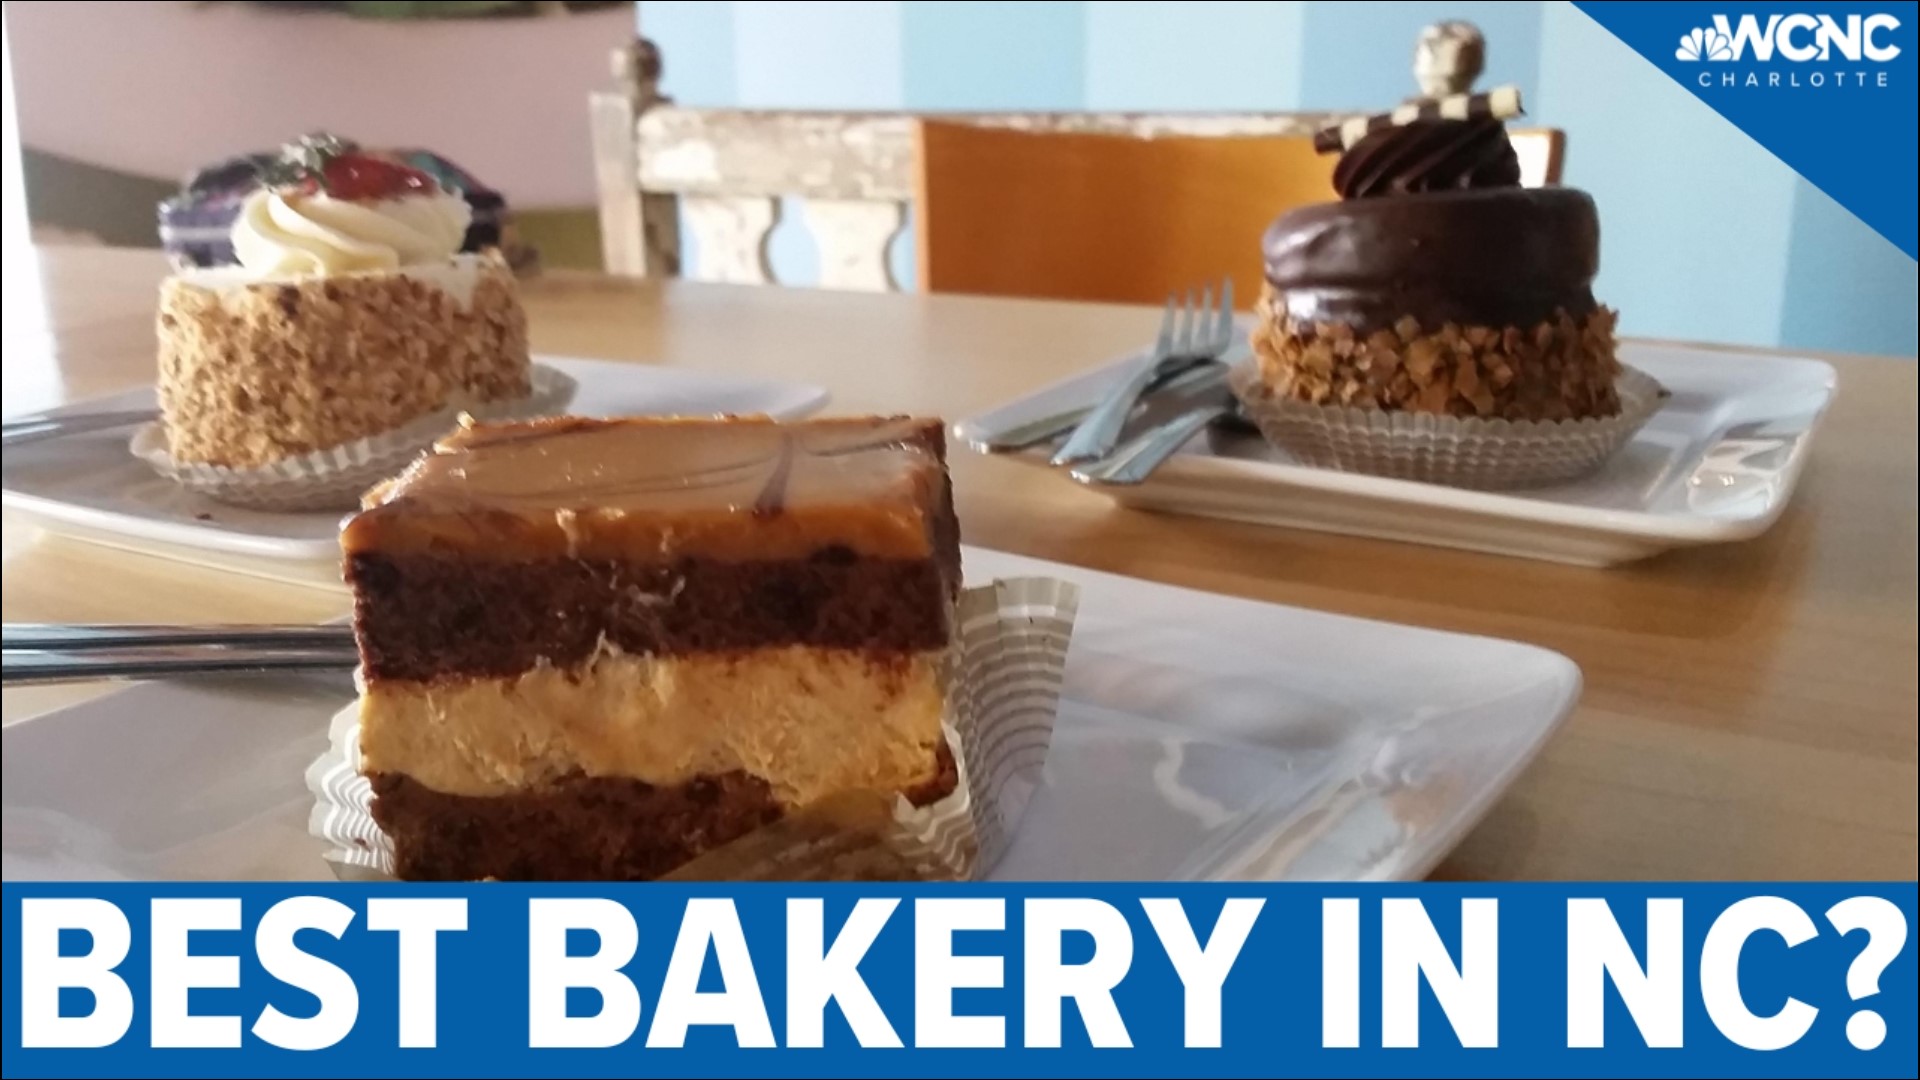 According to Southern Living, the best bakery in North Carolina is right here in Charlotte.